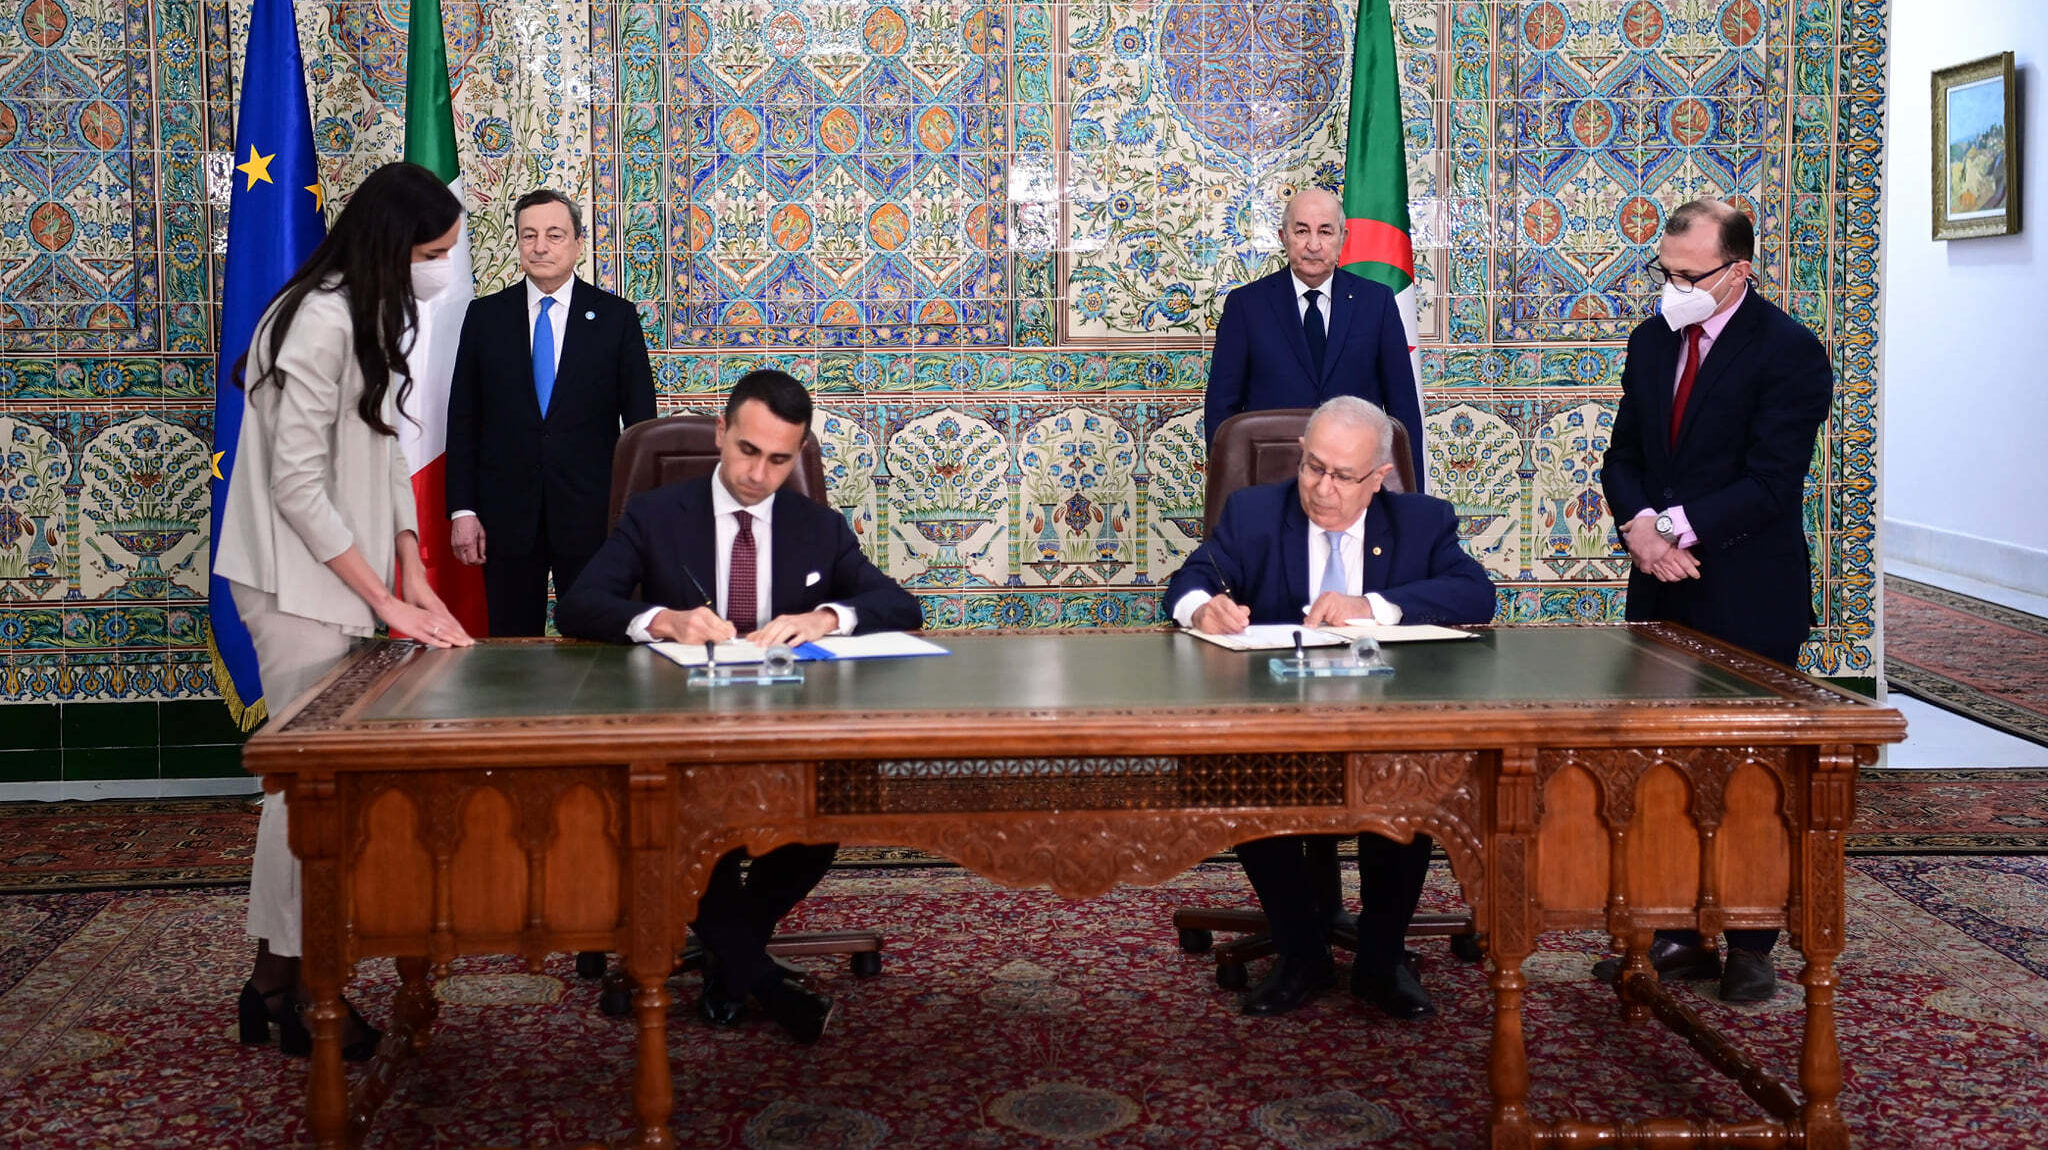 Algeria, Italy Sign Gas Deal as Europe Looks To Wean Itself off Russian Energy